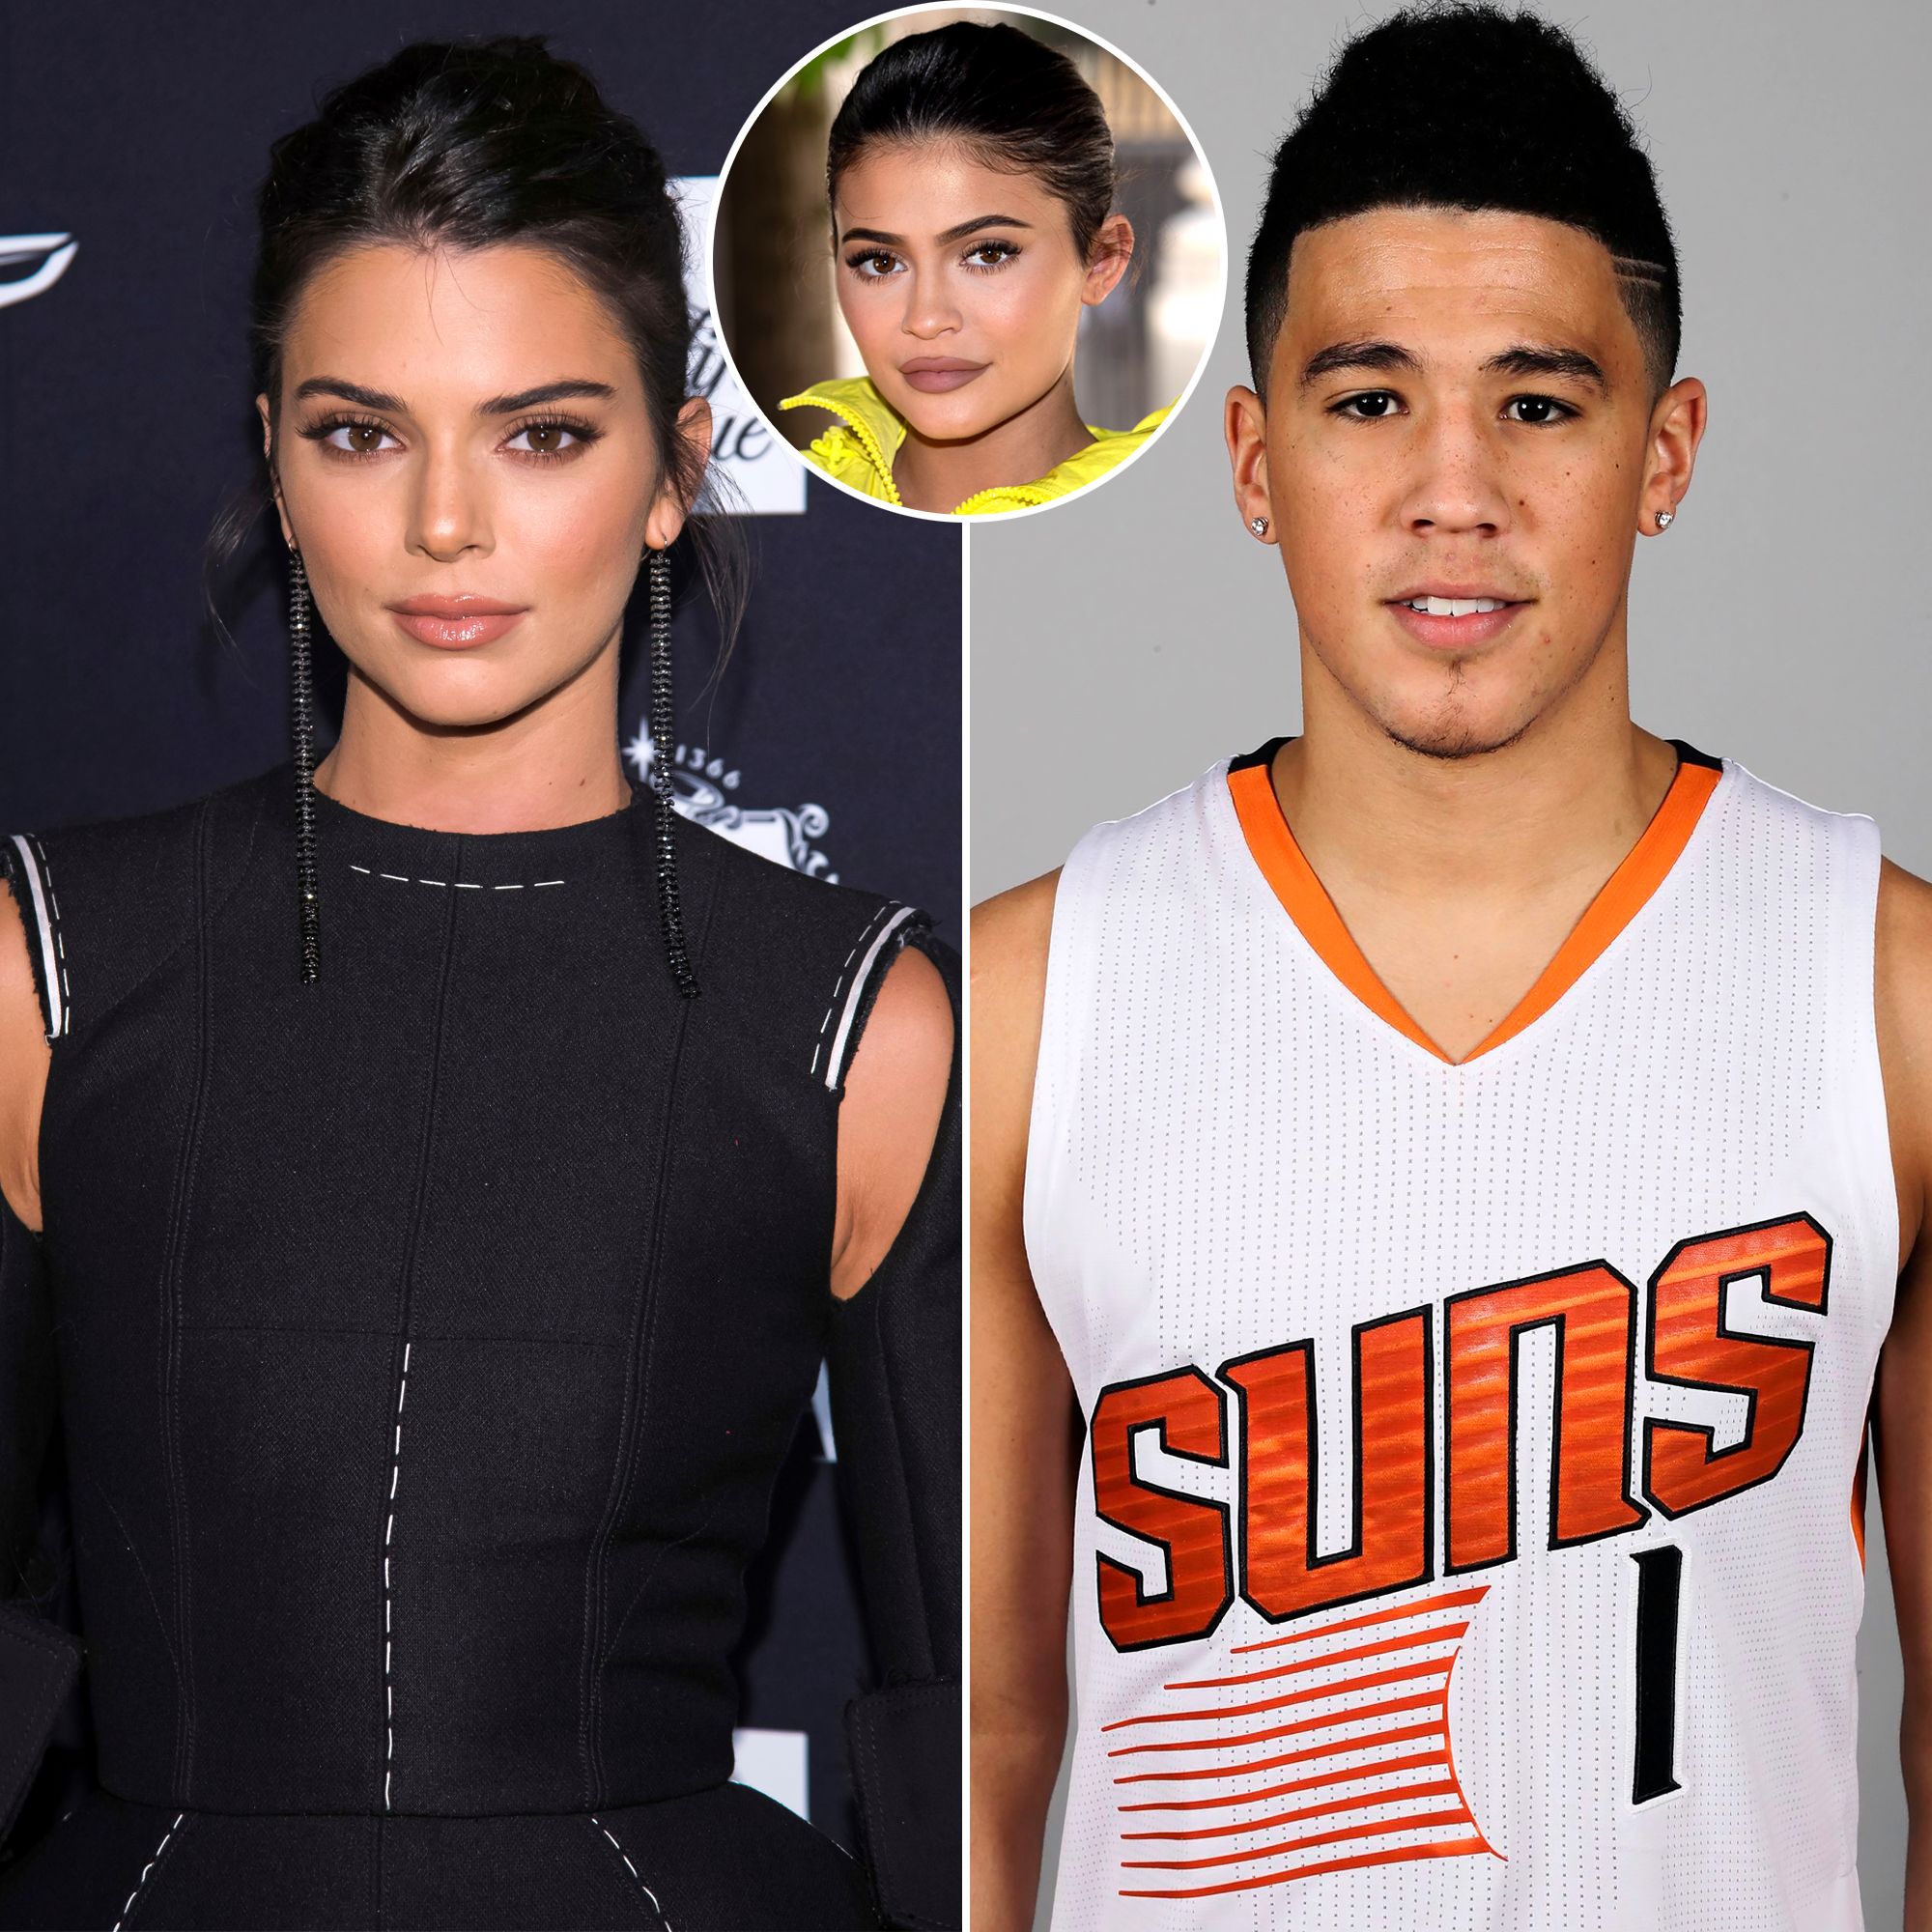 “Corny and Predatory”: From Jordan Clarkson to Devin Booker, Kim  Kardashian's 'Inappropriate' Dig at Sister Kendall Jenner Makes Fans' Blood  Boil - EssentiallySports